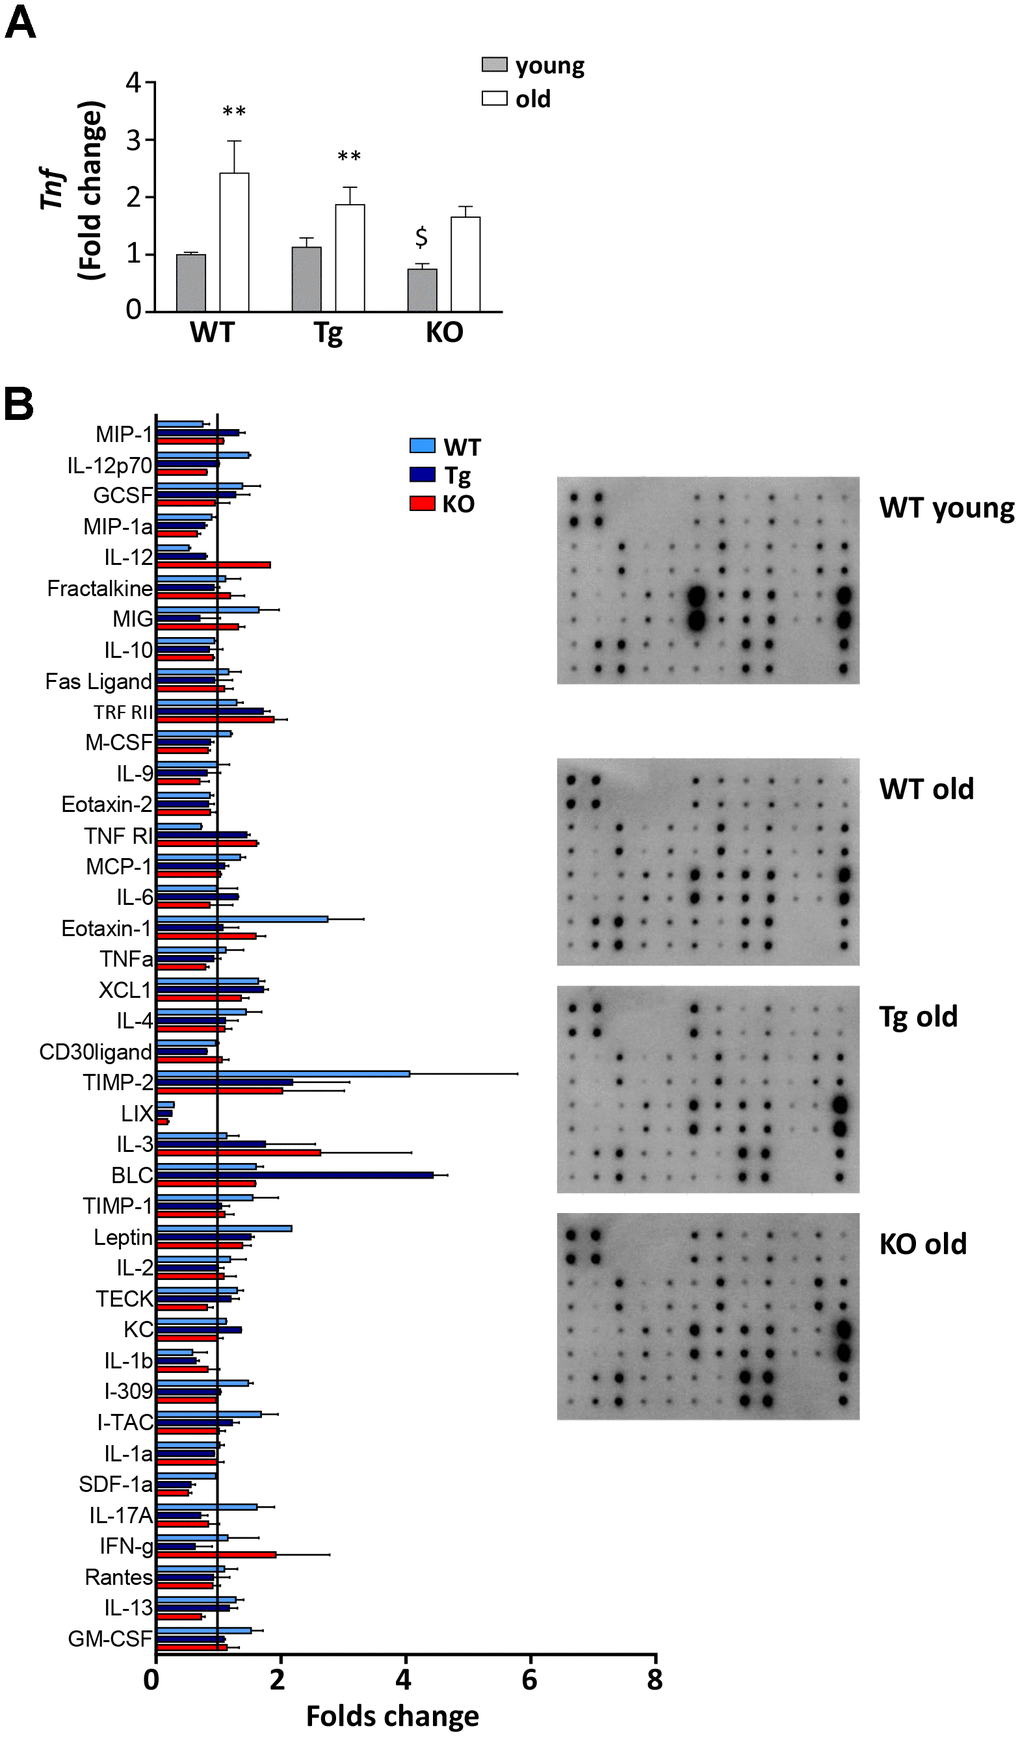 Inflammatory response in old WT, Tg, and Ghrl KO mice. (A) TNF-α (Tnf) expression in epididymal fat of 3-month old (young) and 24-month old (old) WT, Tg, and Ghrl KO mice, determined by real-time RT-PCR. Data in bar graph are presented as mean ± SEM. Young mice: WT= 3, Tg= 4, Ghrl KO = 4; old mice: WT= 5, Tg= 7, Ghrl KO = 5. (B) Serum biomarkers involved in systemic inflammation normalized on the levels in young WT mice (reference line). Young mice WT=4; old mice: WT= 4, Tg= 4, Ghrl KO = 4 pulled into two groups. Data in bar graph are presented as mean ± SD. *p$pGhrl KO vs. WT.